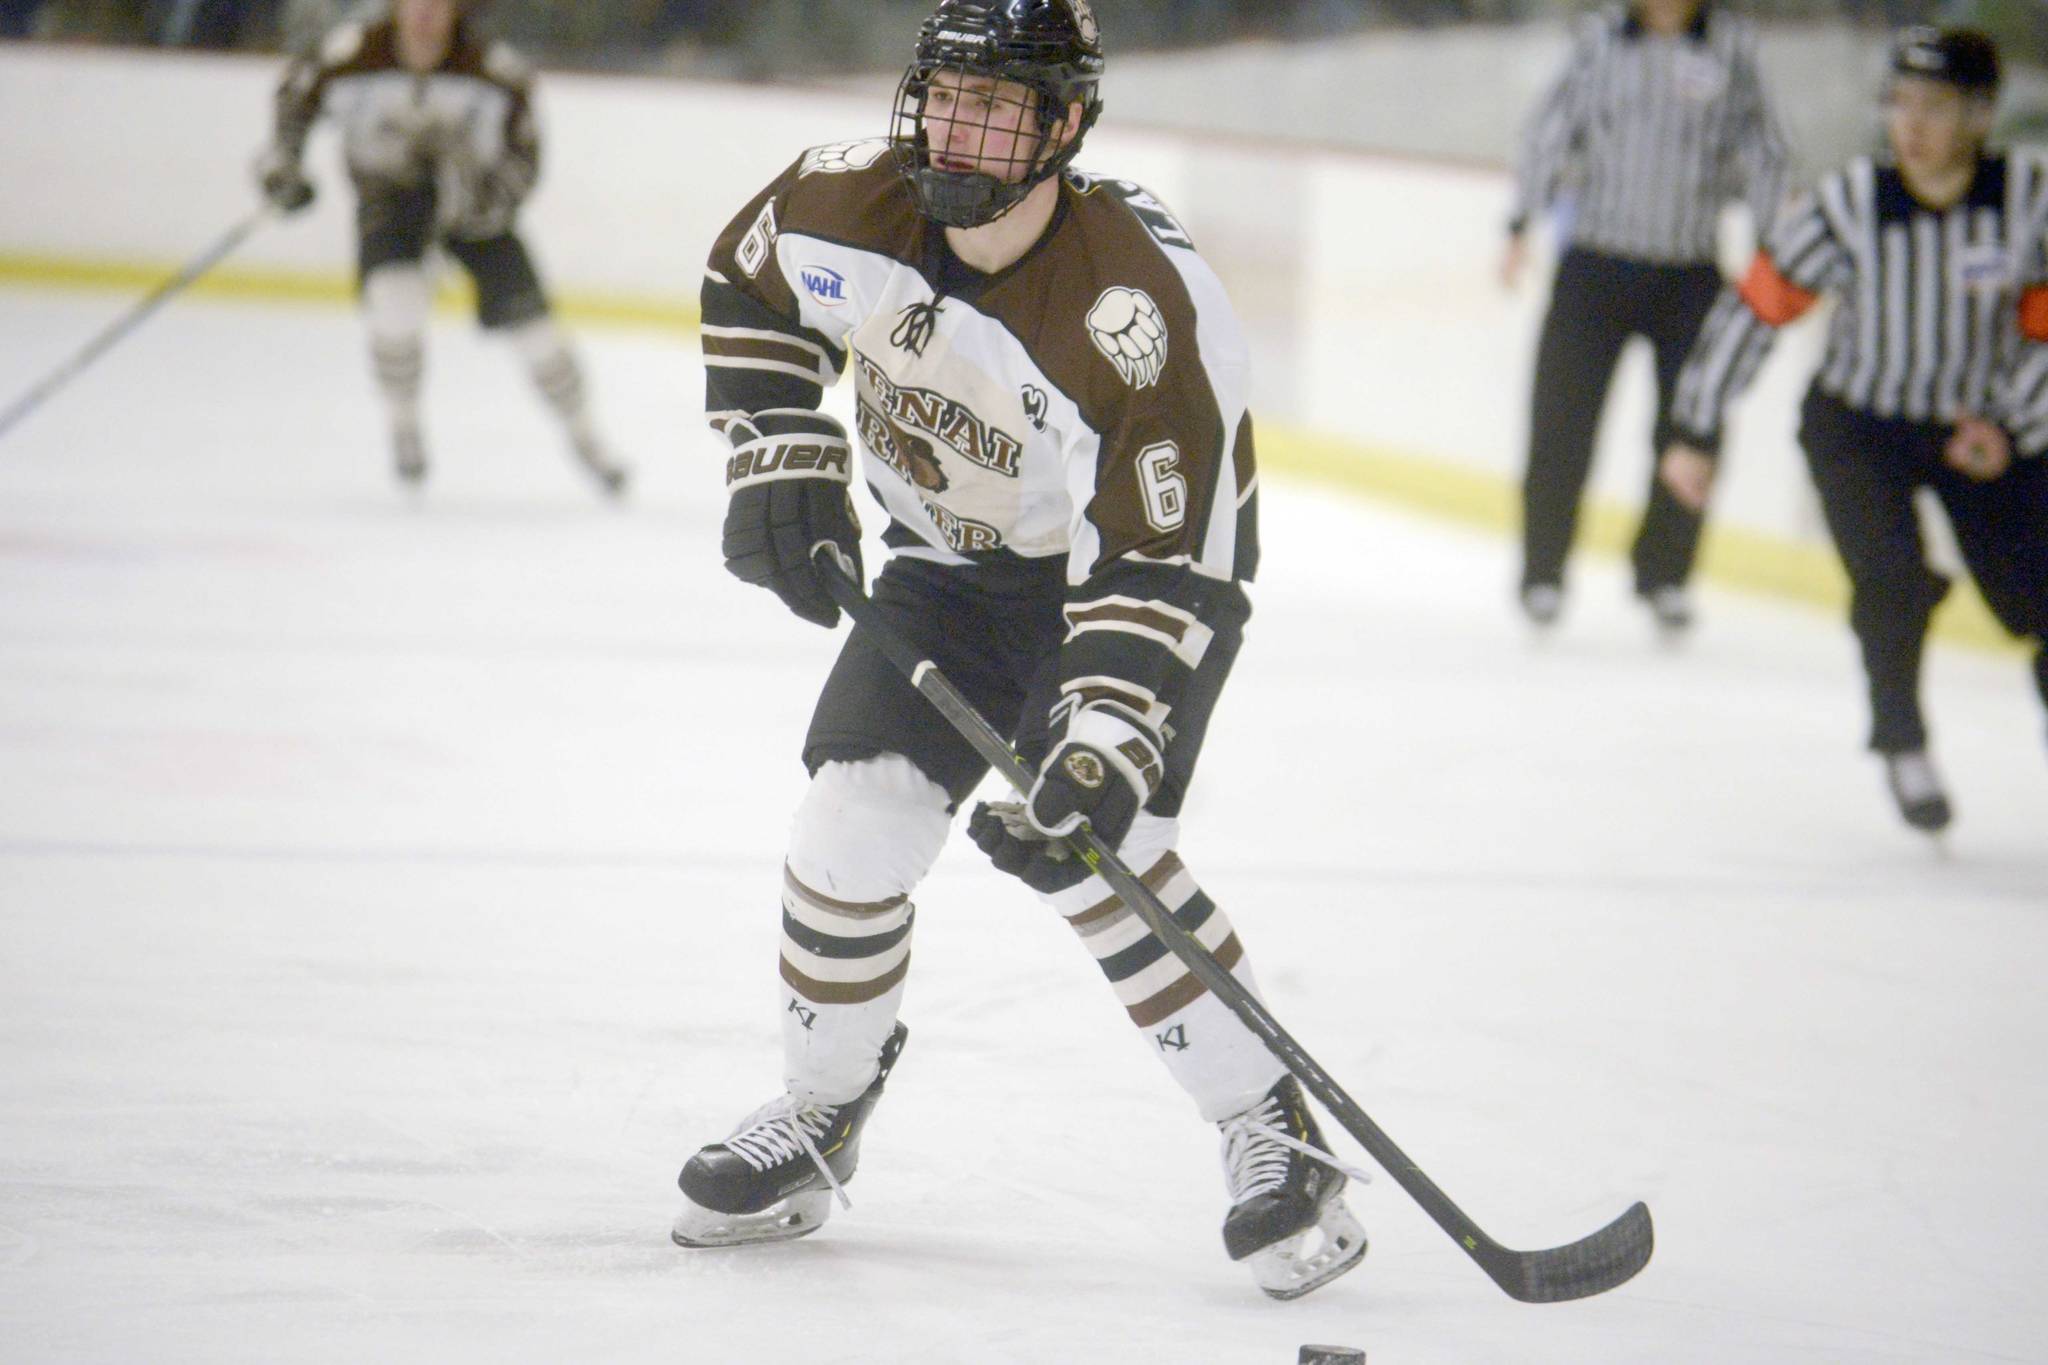 Eagle River’s Lajoie comes of age quickly for Brown Bears